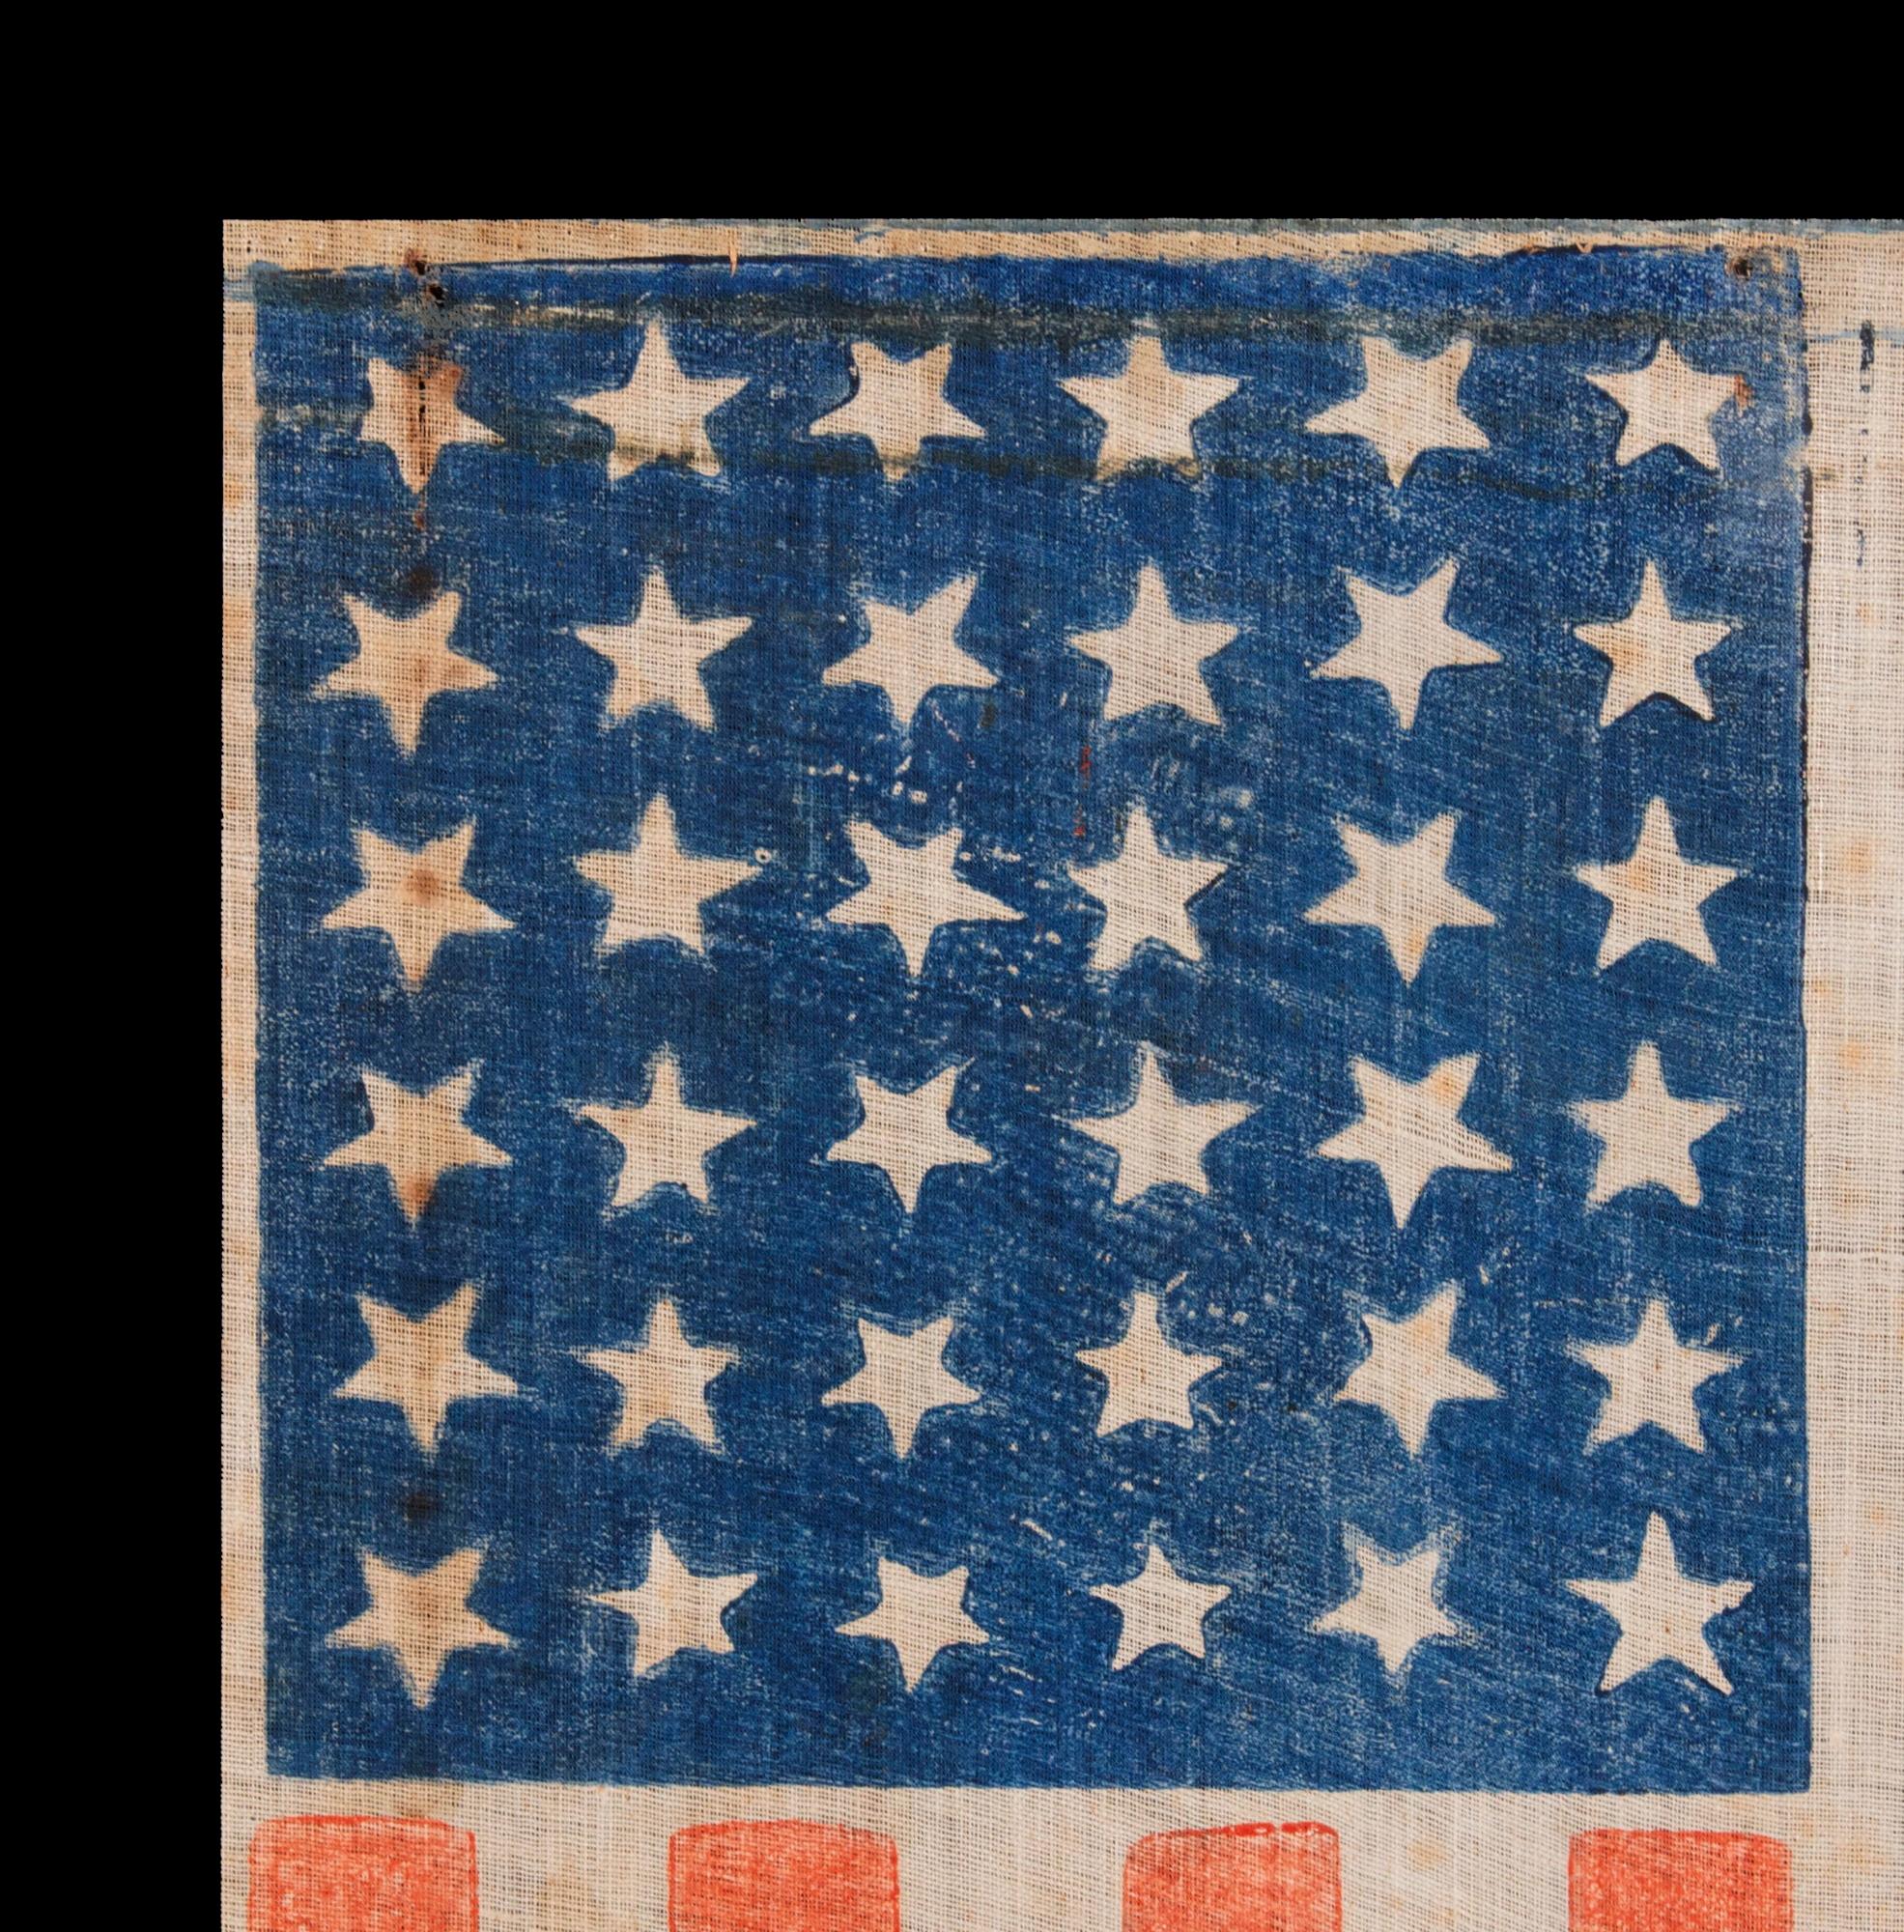 36 STAR ANTIQUE AMERICAN PARADE FLAG, WITH STARS THAT ALTERNATE IN THEIR VERTICAL POSITION FROM COLUMN TO COLUMN AND ROW-TO-ROW, PRINTED ON AN ESPECIALLY INTERESTING LENGTH OF COARSE COTTON WITH A CRUDE WEAVE THAT RESULTS IN A VISUALLY COMPELLING